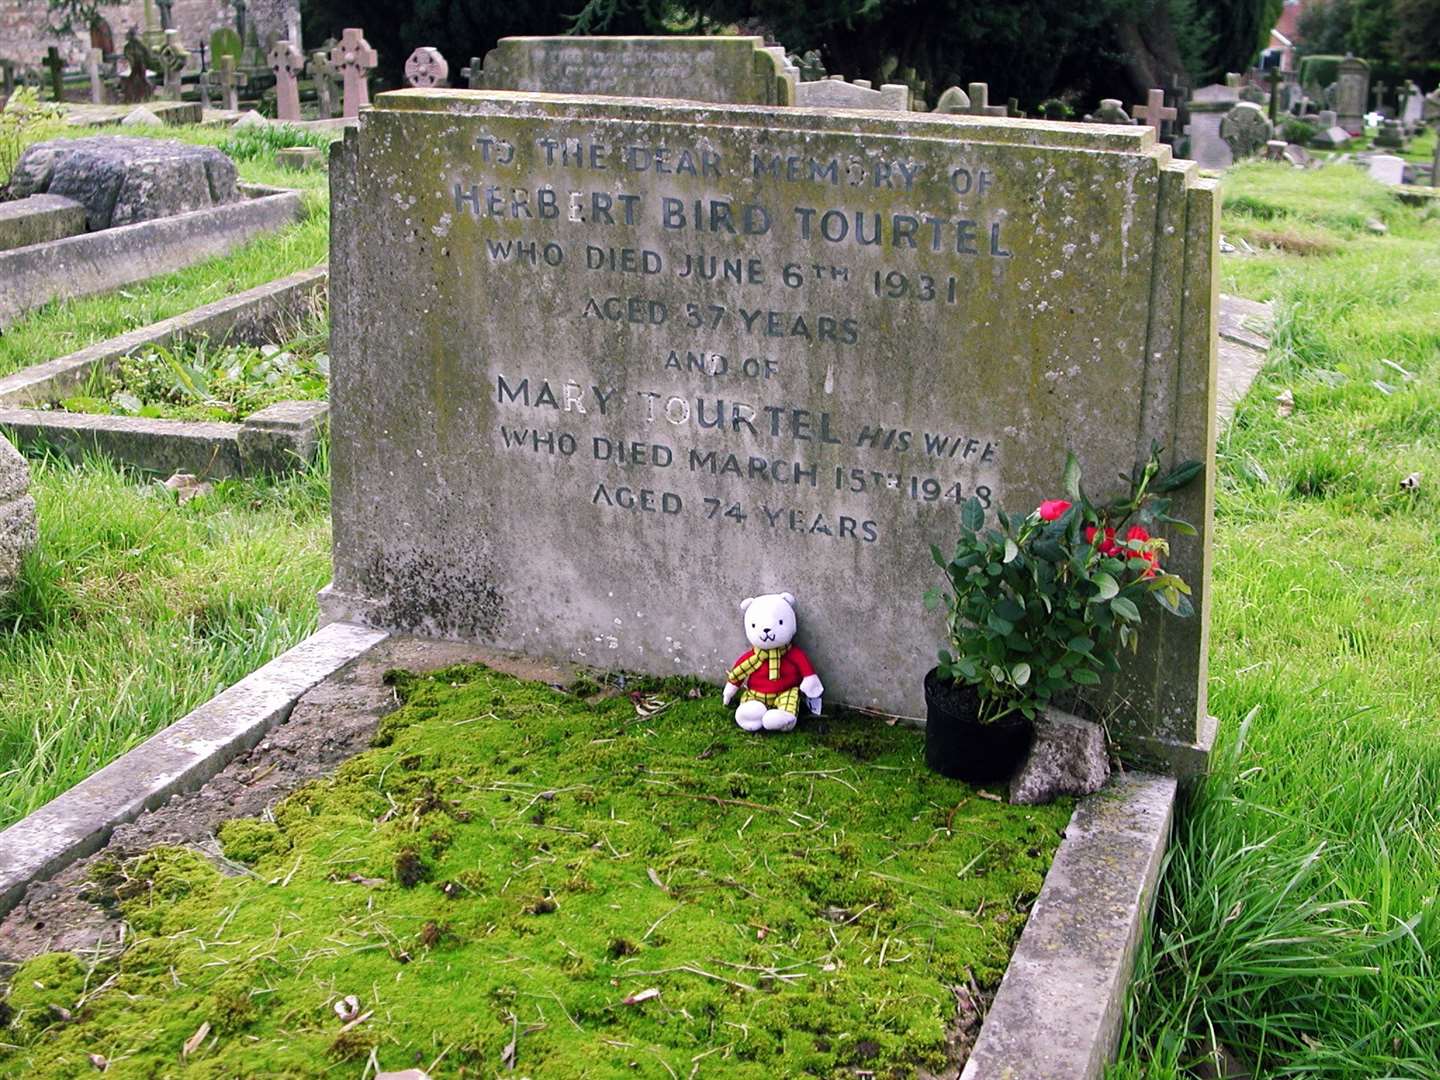 The grave of both Mary and her husband Herbert at St Martin's Church